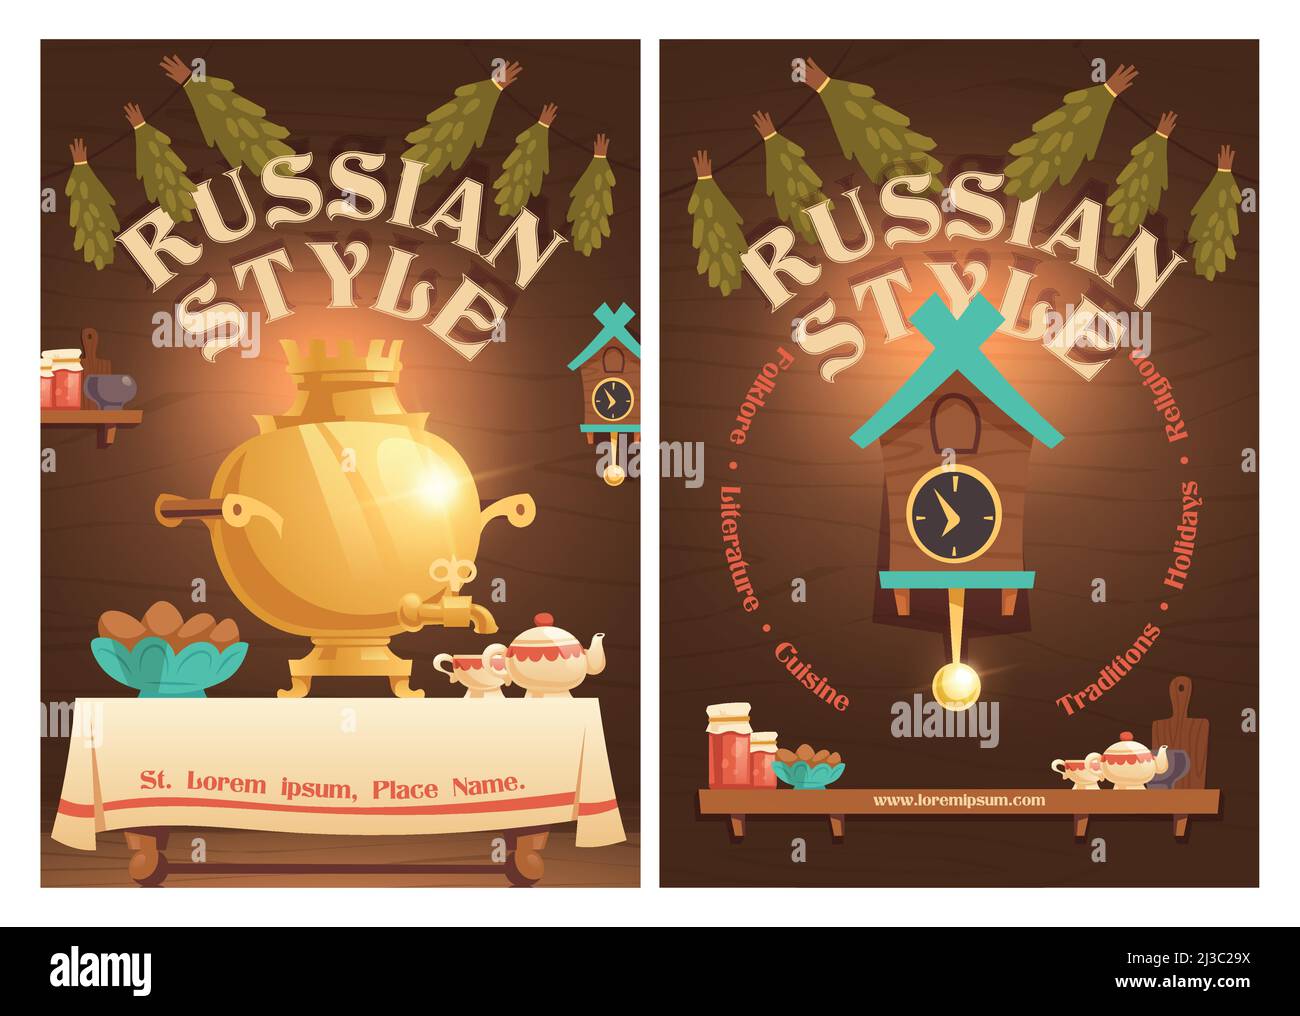 Russian style cartoon poster with old rural kitchen interior stuff samovar on table with teapot and bakery in plates, Cuckoo-clock, jam and utensils o Stock Vector